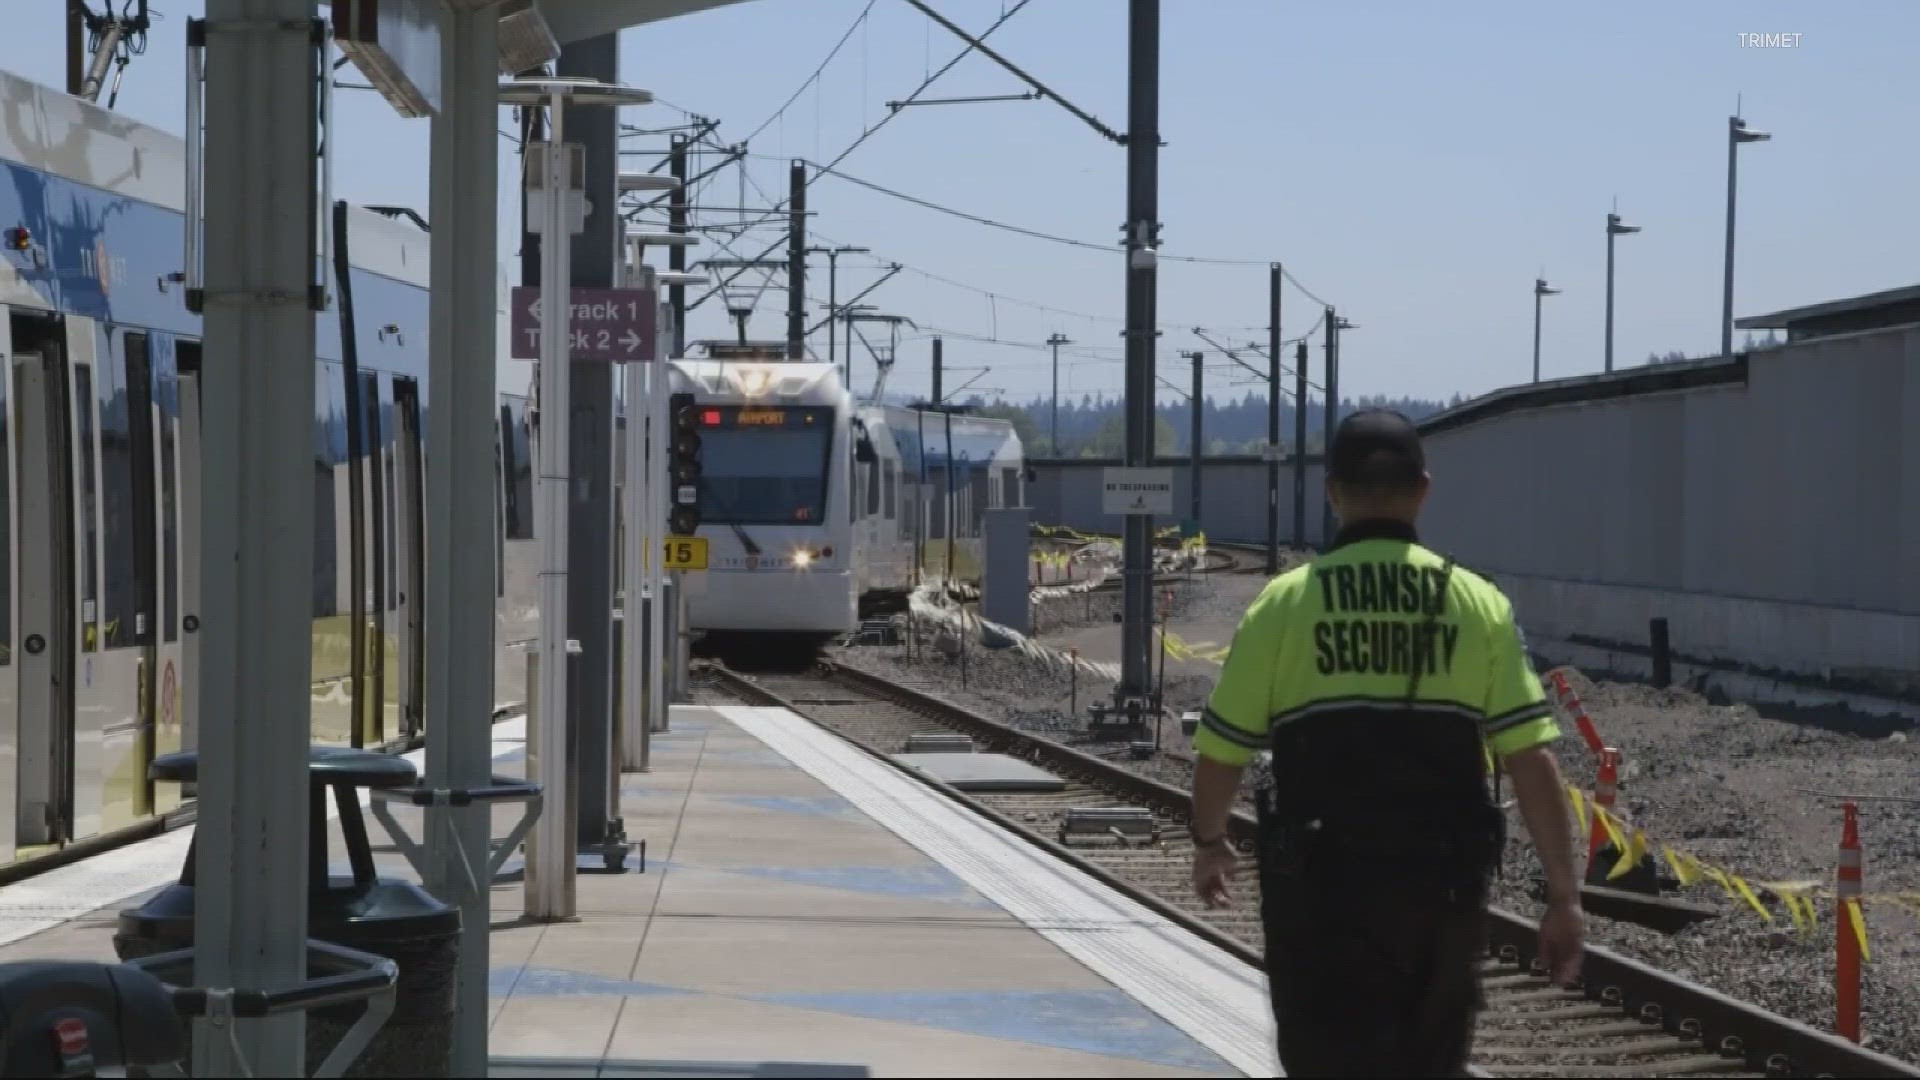 The county district attorney’s office and TriMet have cooperated since 1998. They recently agreed on an expanded contract for transit-related crimes.